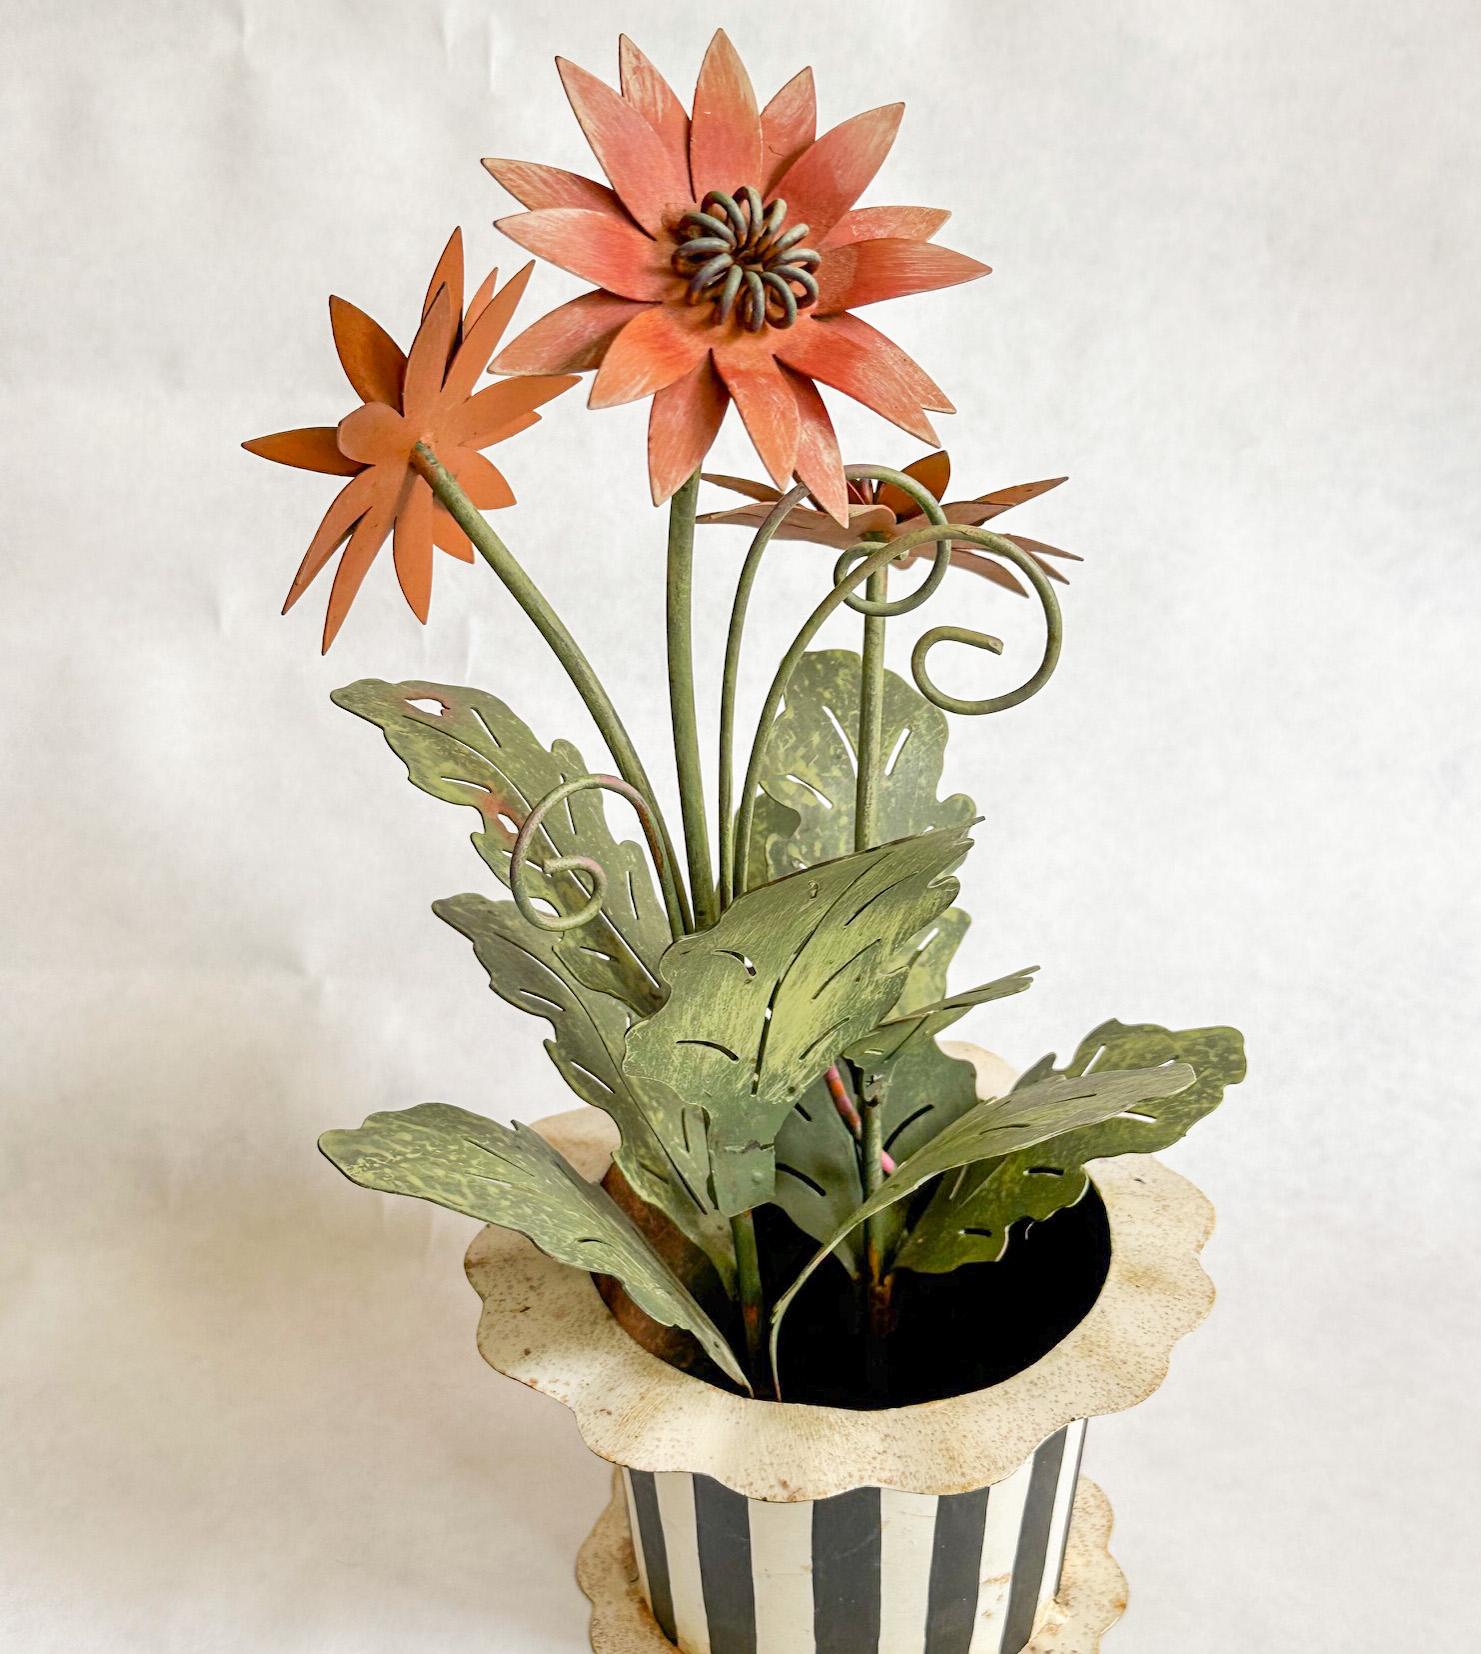 Offered is an elegant tole painted metal expressionist poppy flower plant in a scalloped edge striped container styled after MacKenzie Childs. The details include unfurling leaf tendrils, 